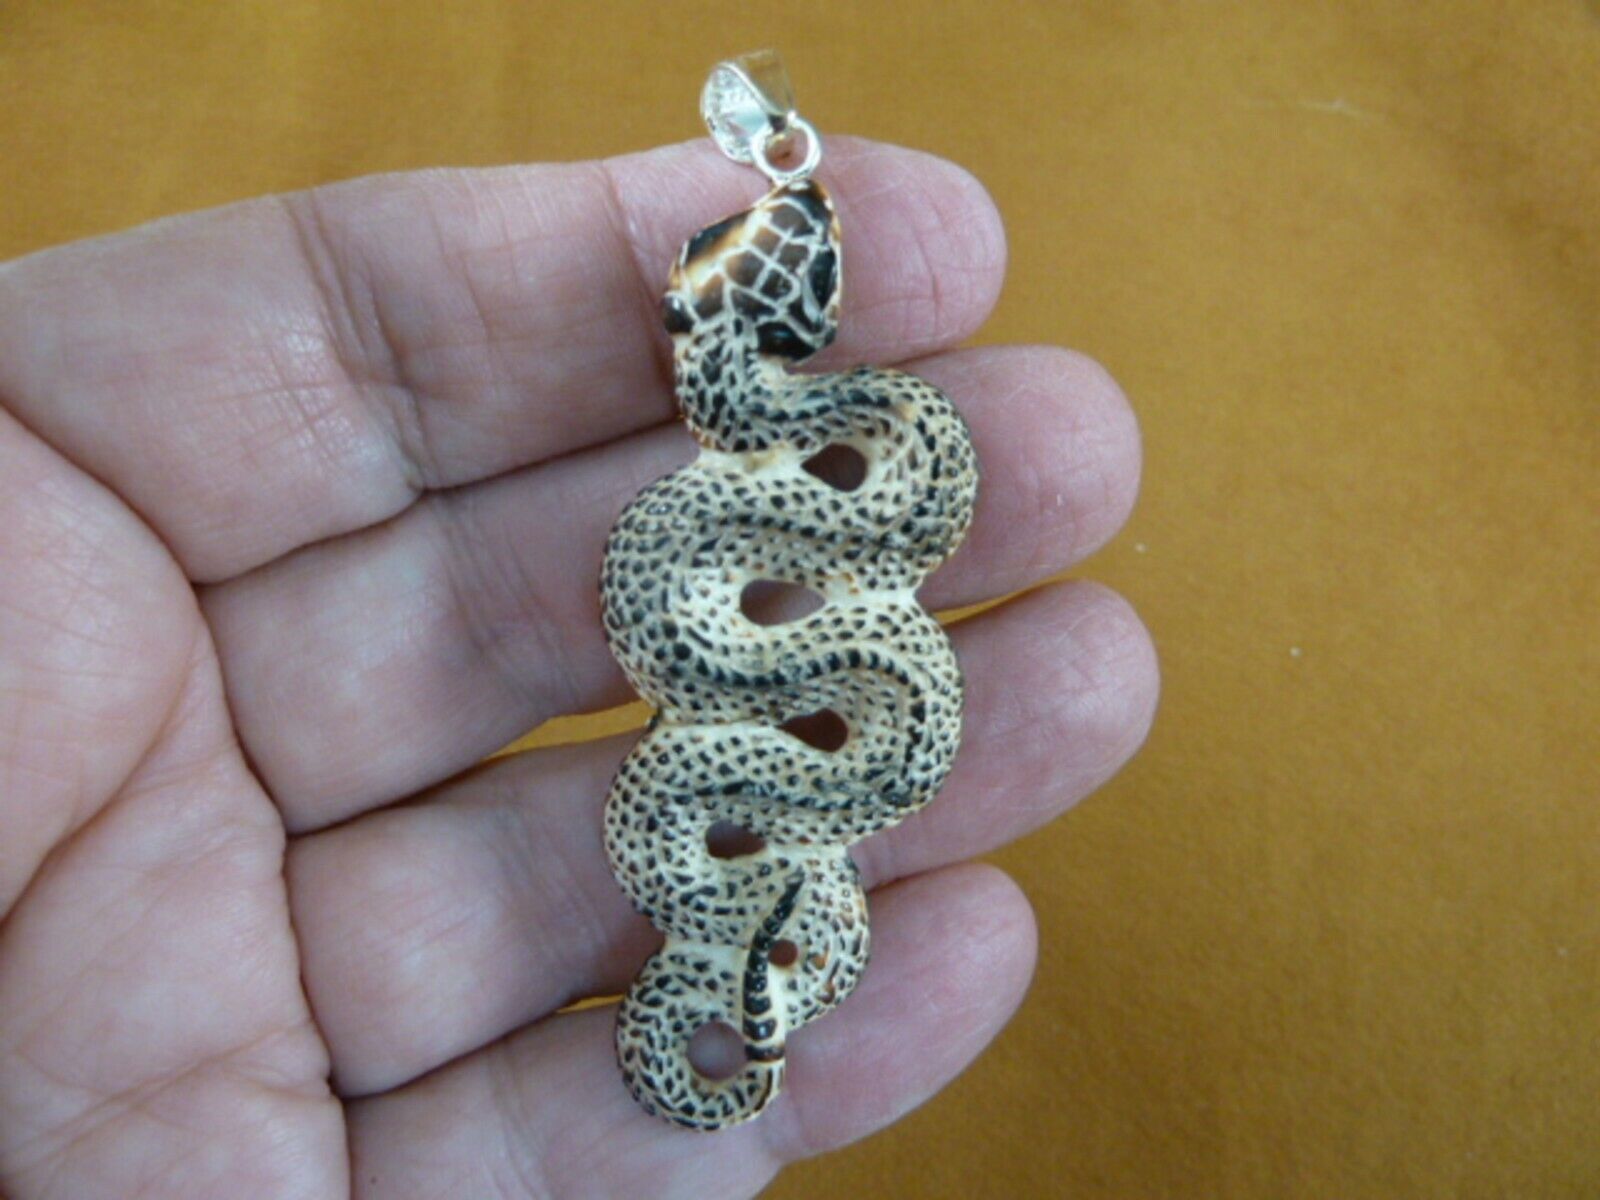 Primary image for j-SNAKE-21) long SNAKE PENDANT aceh bovine bone carving NECKLACE Jewelry snakes